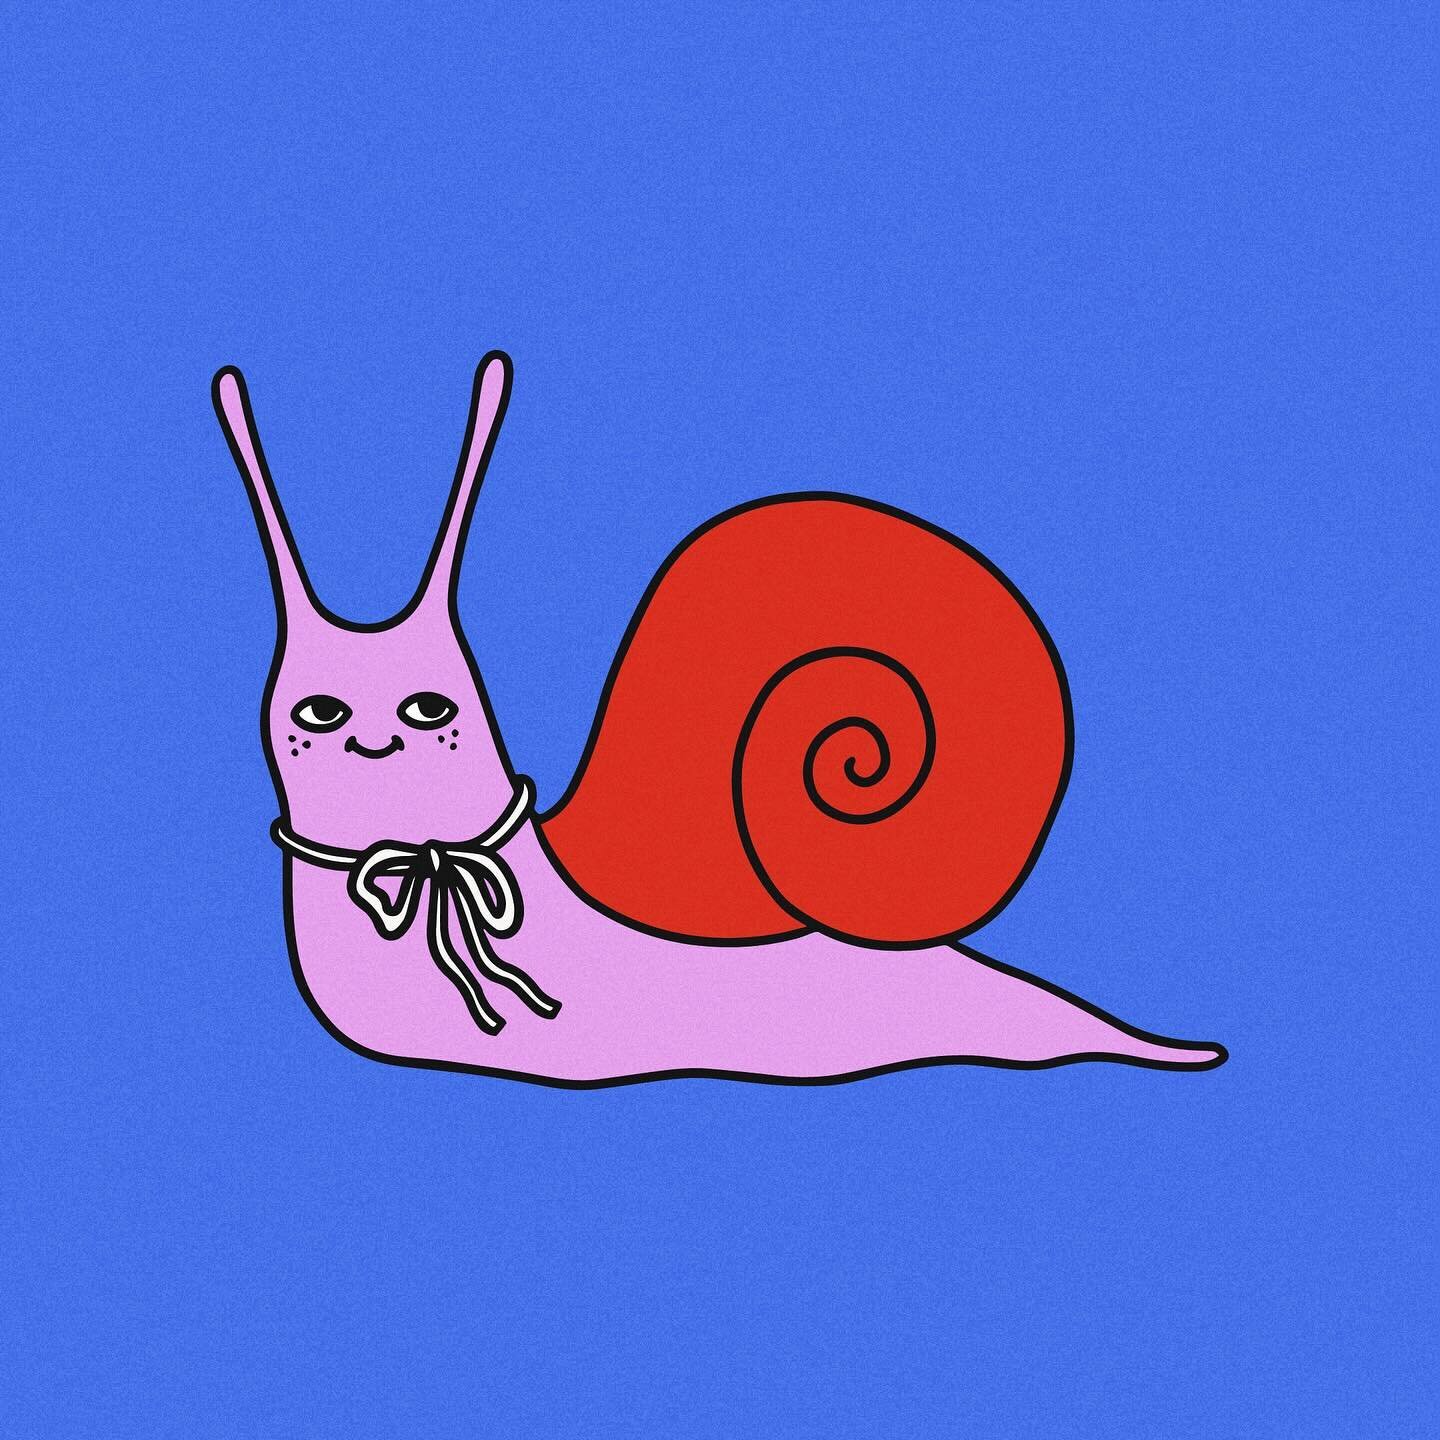 2024 is the year of the snail, baby. Slowing tf down, savoring every moment of the journey - and looking cute doing it. 🐌💕

Who's with me?

#snail #yearofthesnail #snailenergy #slowingdown #whatstherush #2024 #caitlindasdesign #illustration